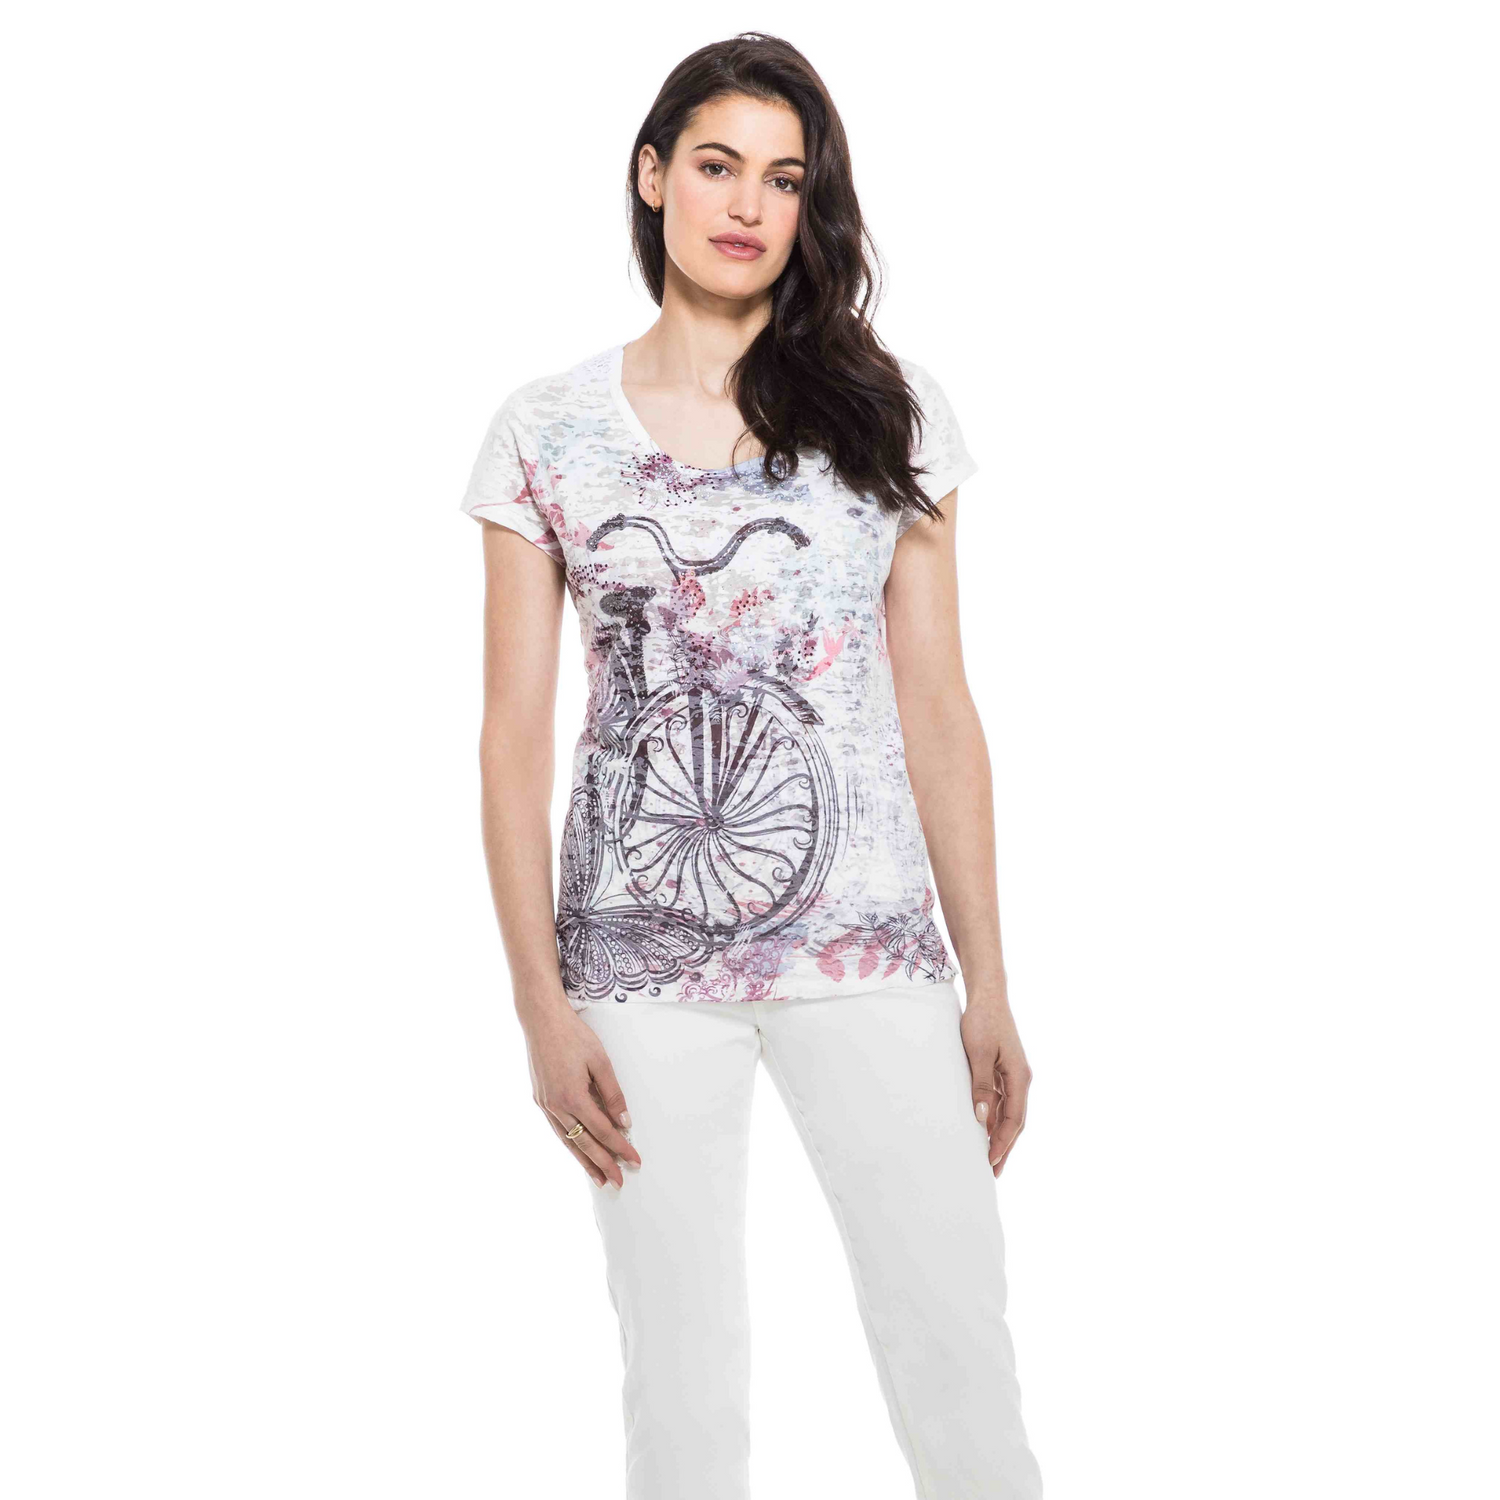 Woman posing in a cute and comfortable Orly Round Neck SS Tee with bicycle print and white pants.